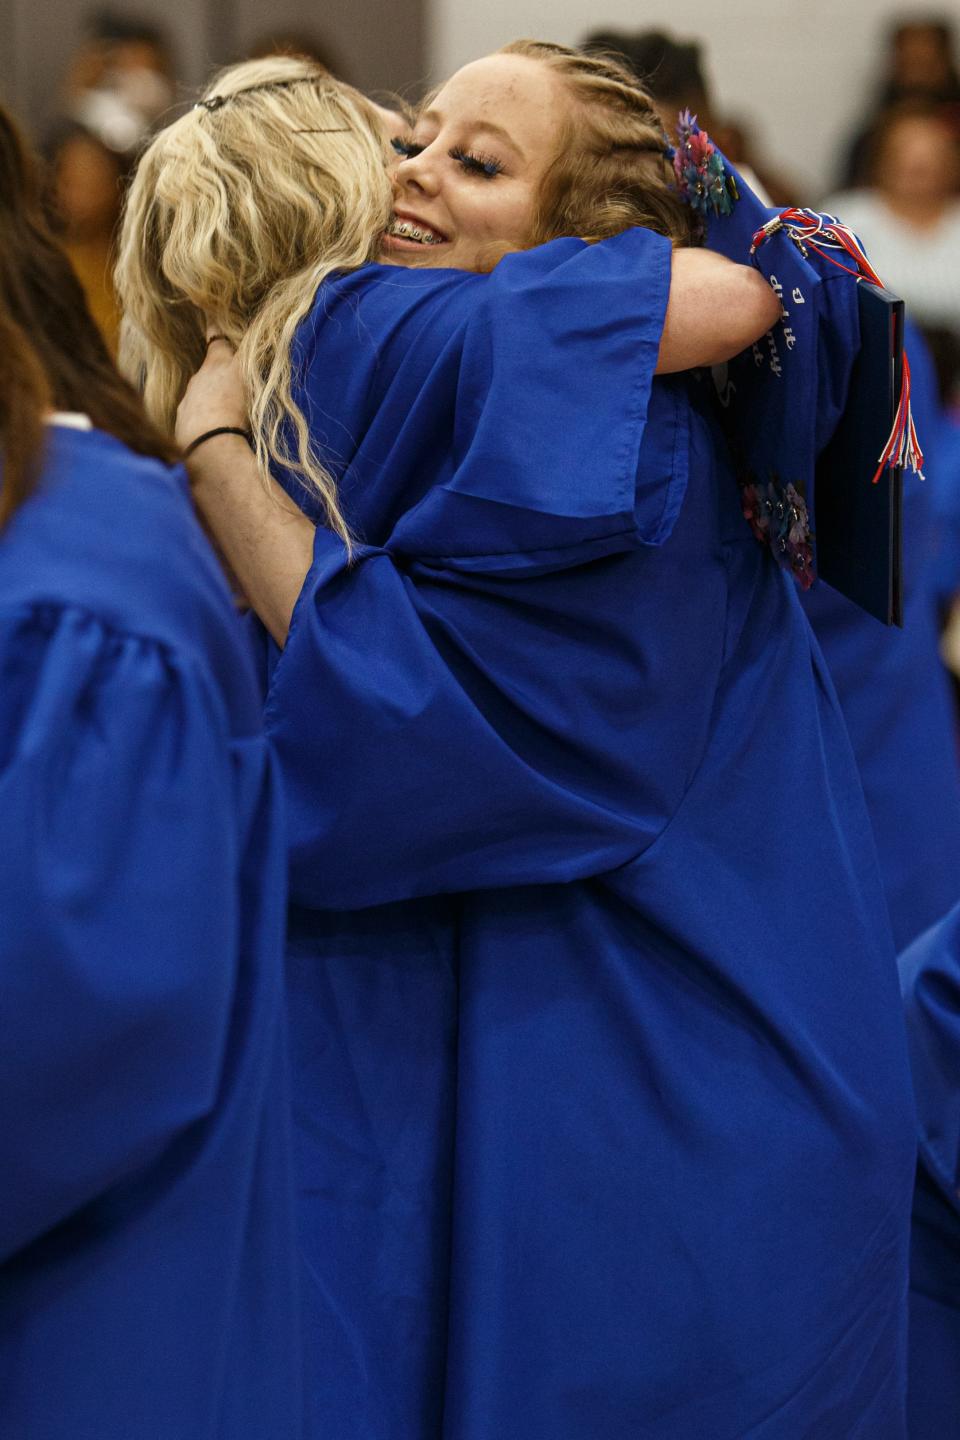 Mount Pleasant High School graduation takes place in Mount Pleasant, Tenn. on May 19, 2023.